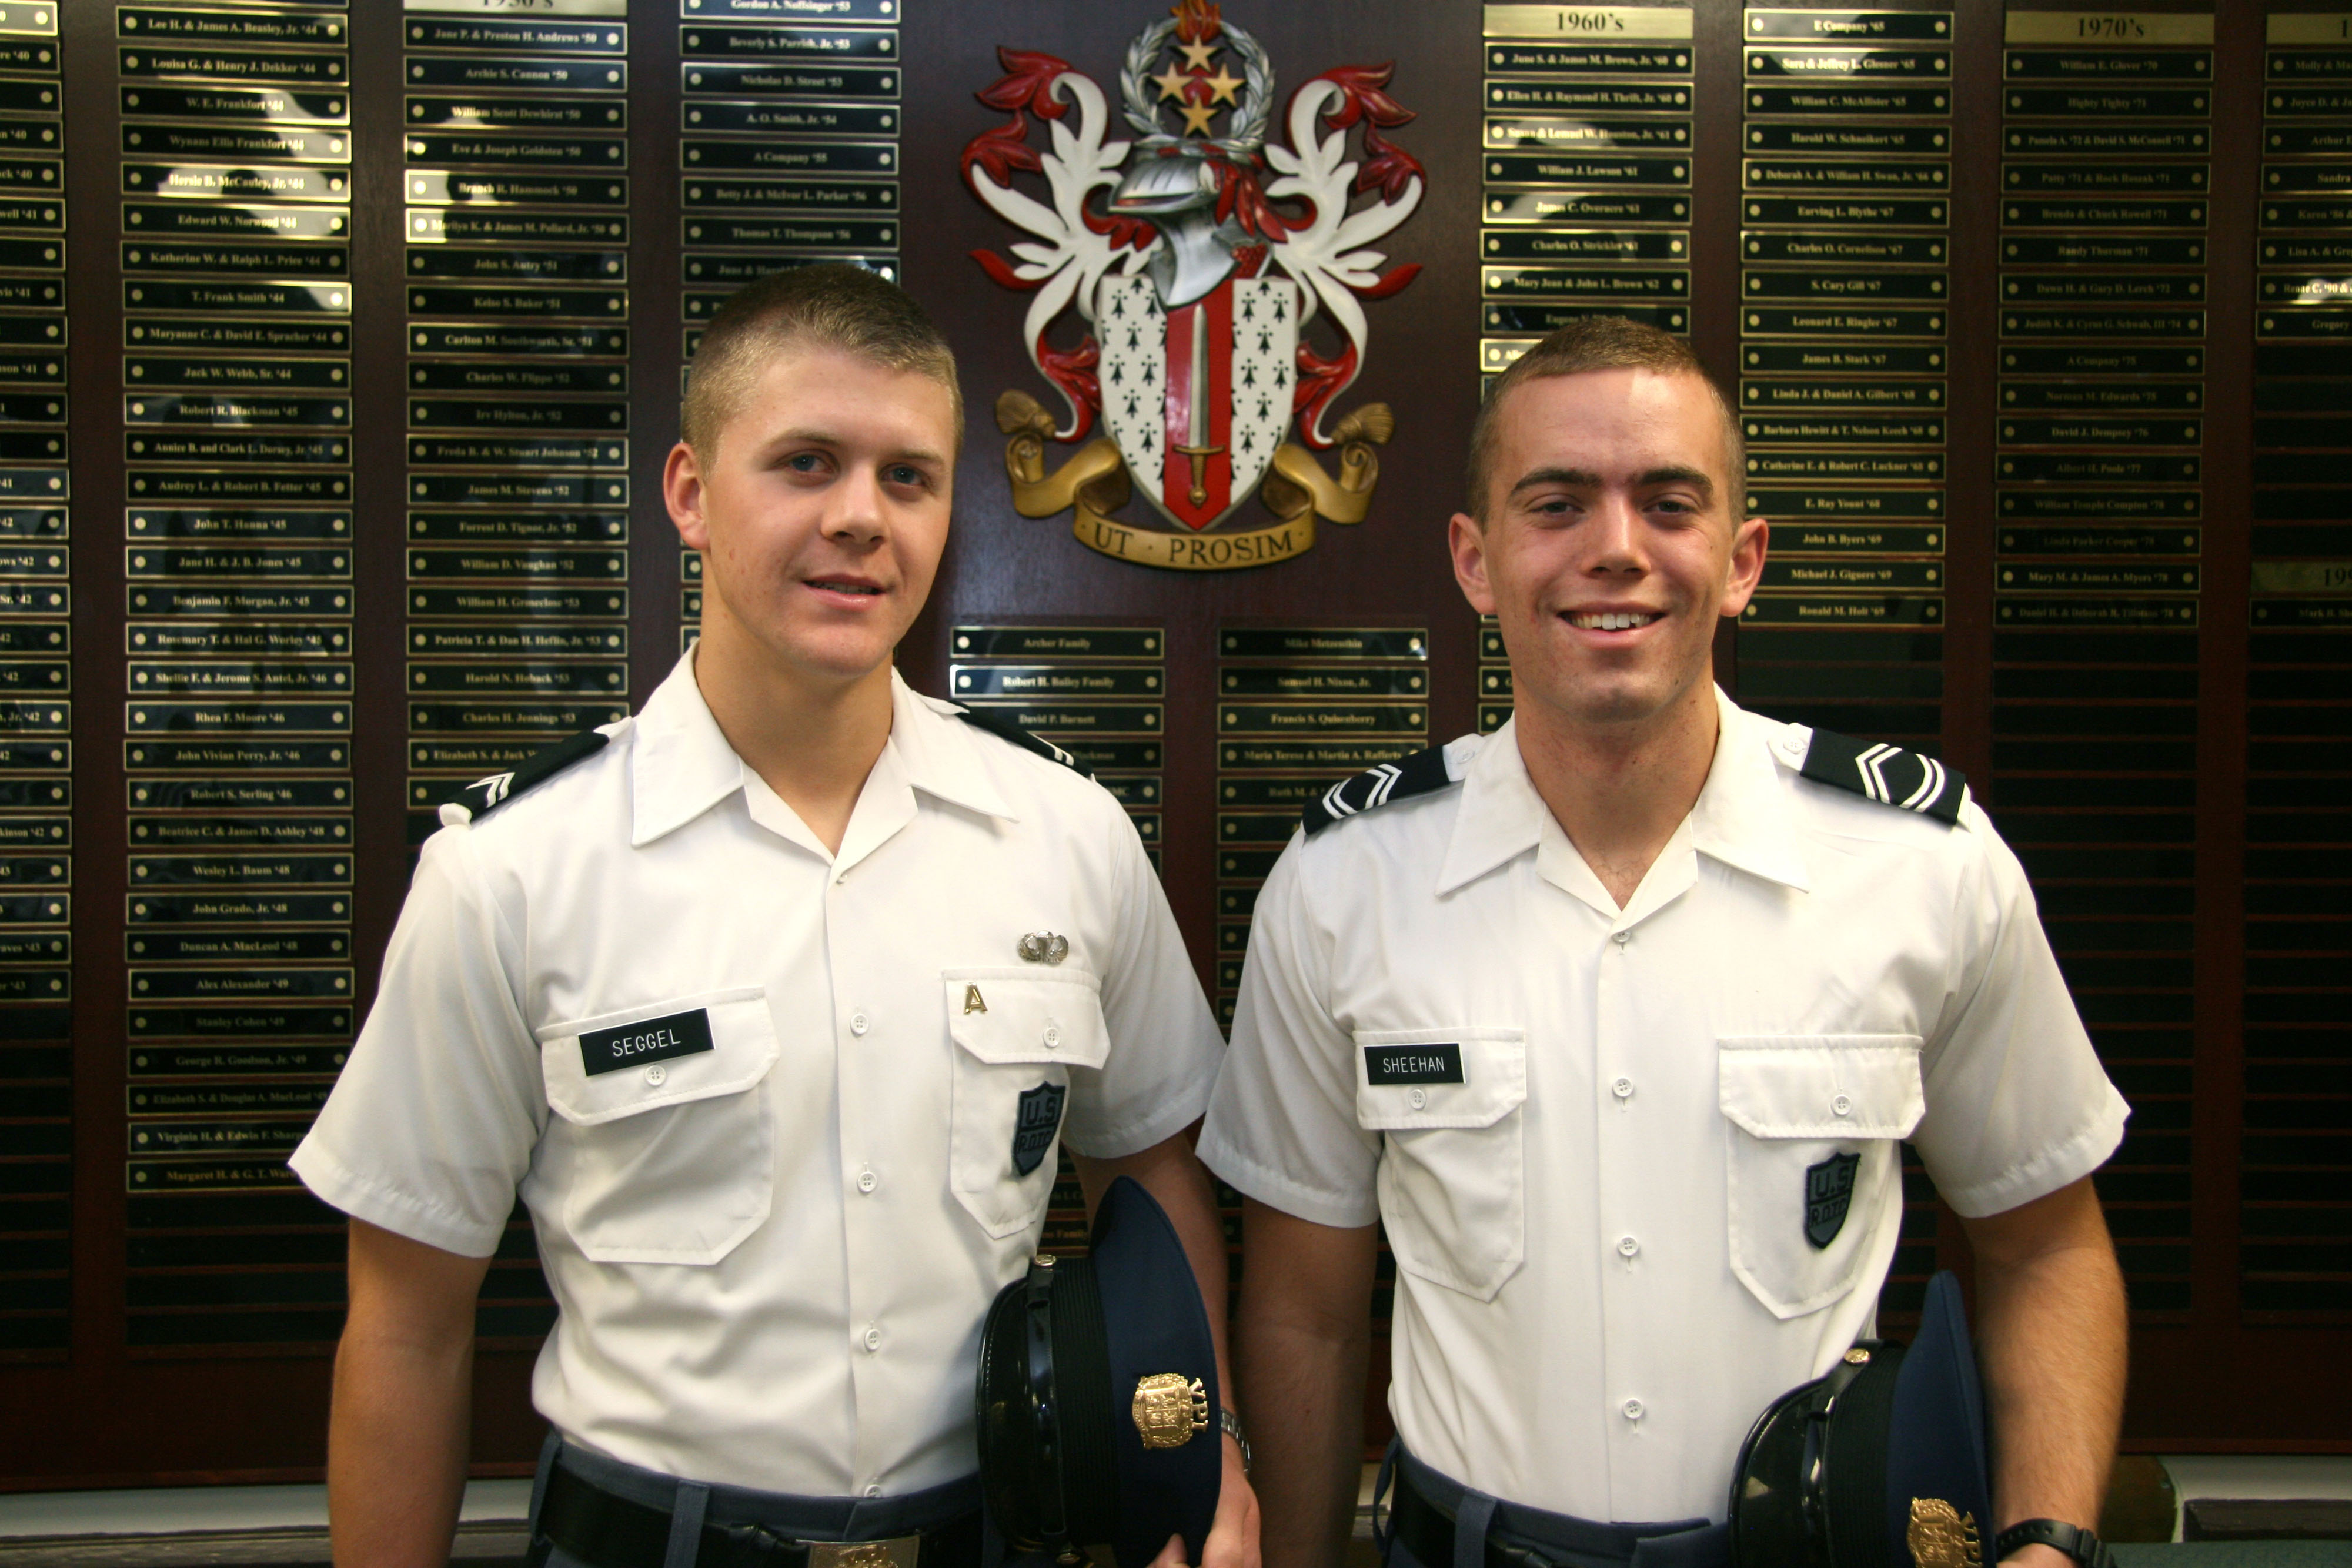 From left to right are Cadets Peter Seggel and James Sheehan